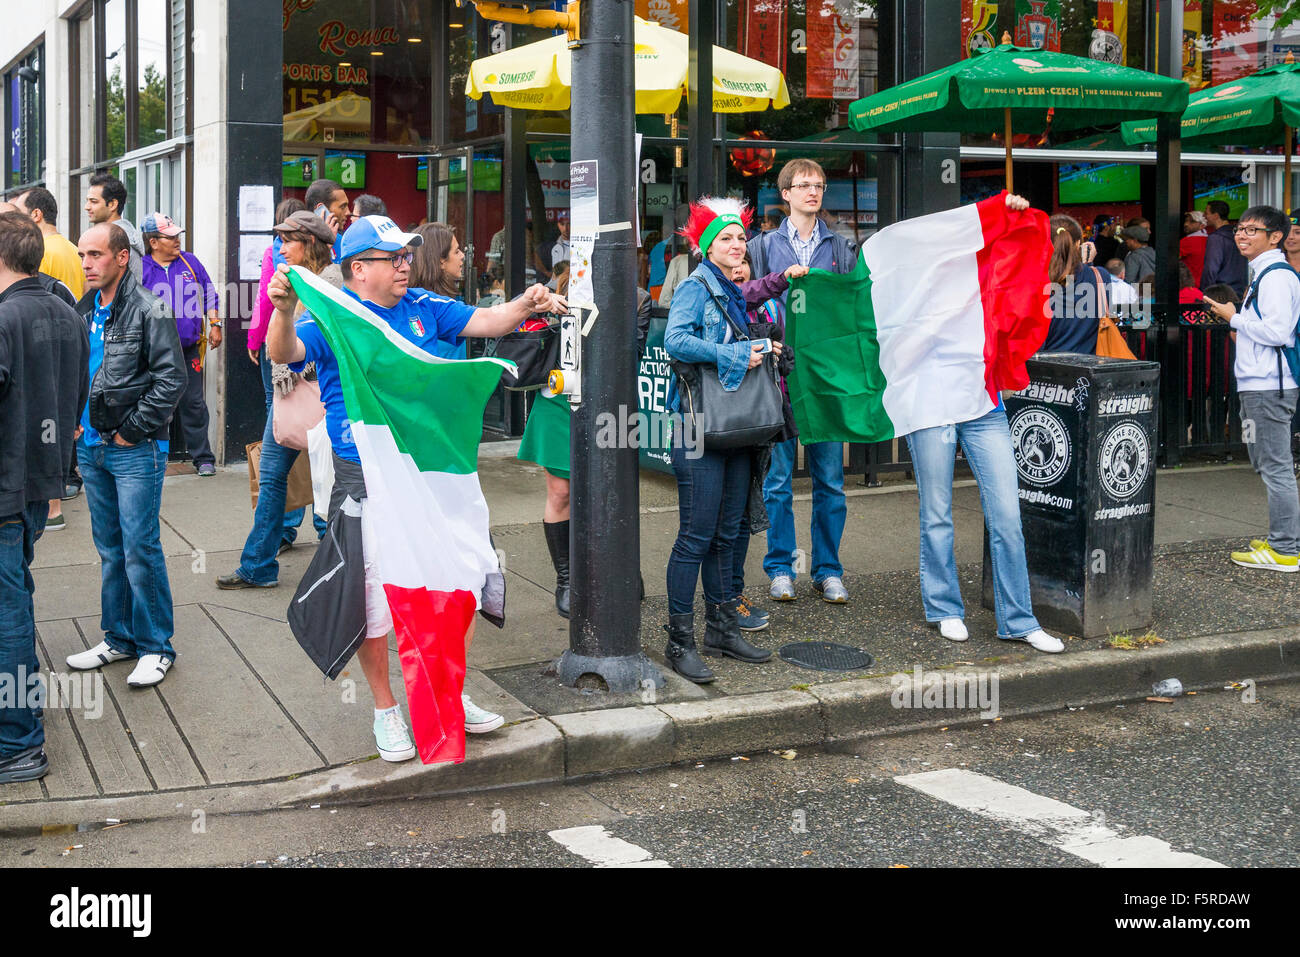 Italian soccer fans celebrate on Commercial Drive, Vancouver, British Columbia, Canada Stock Photo